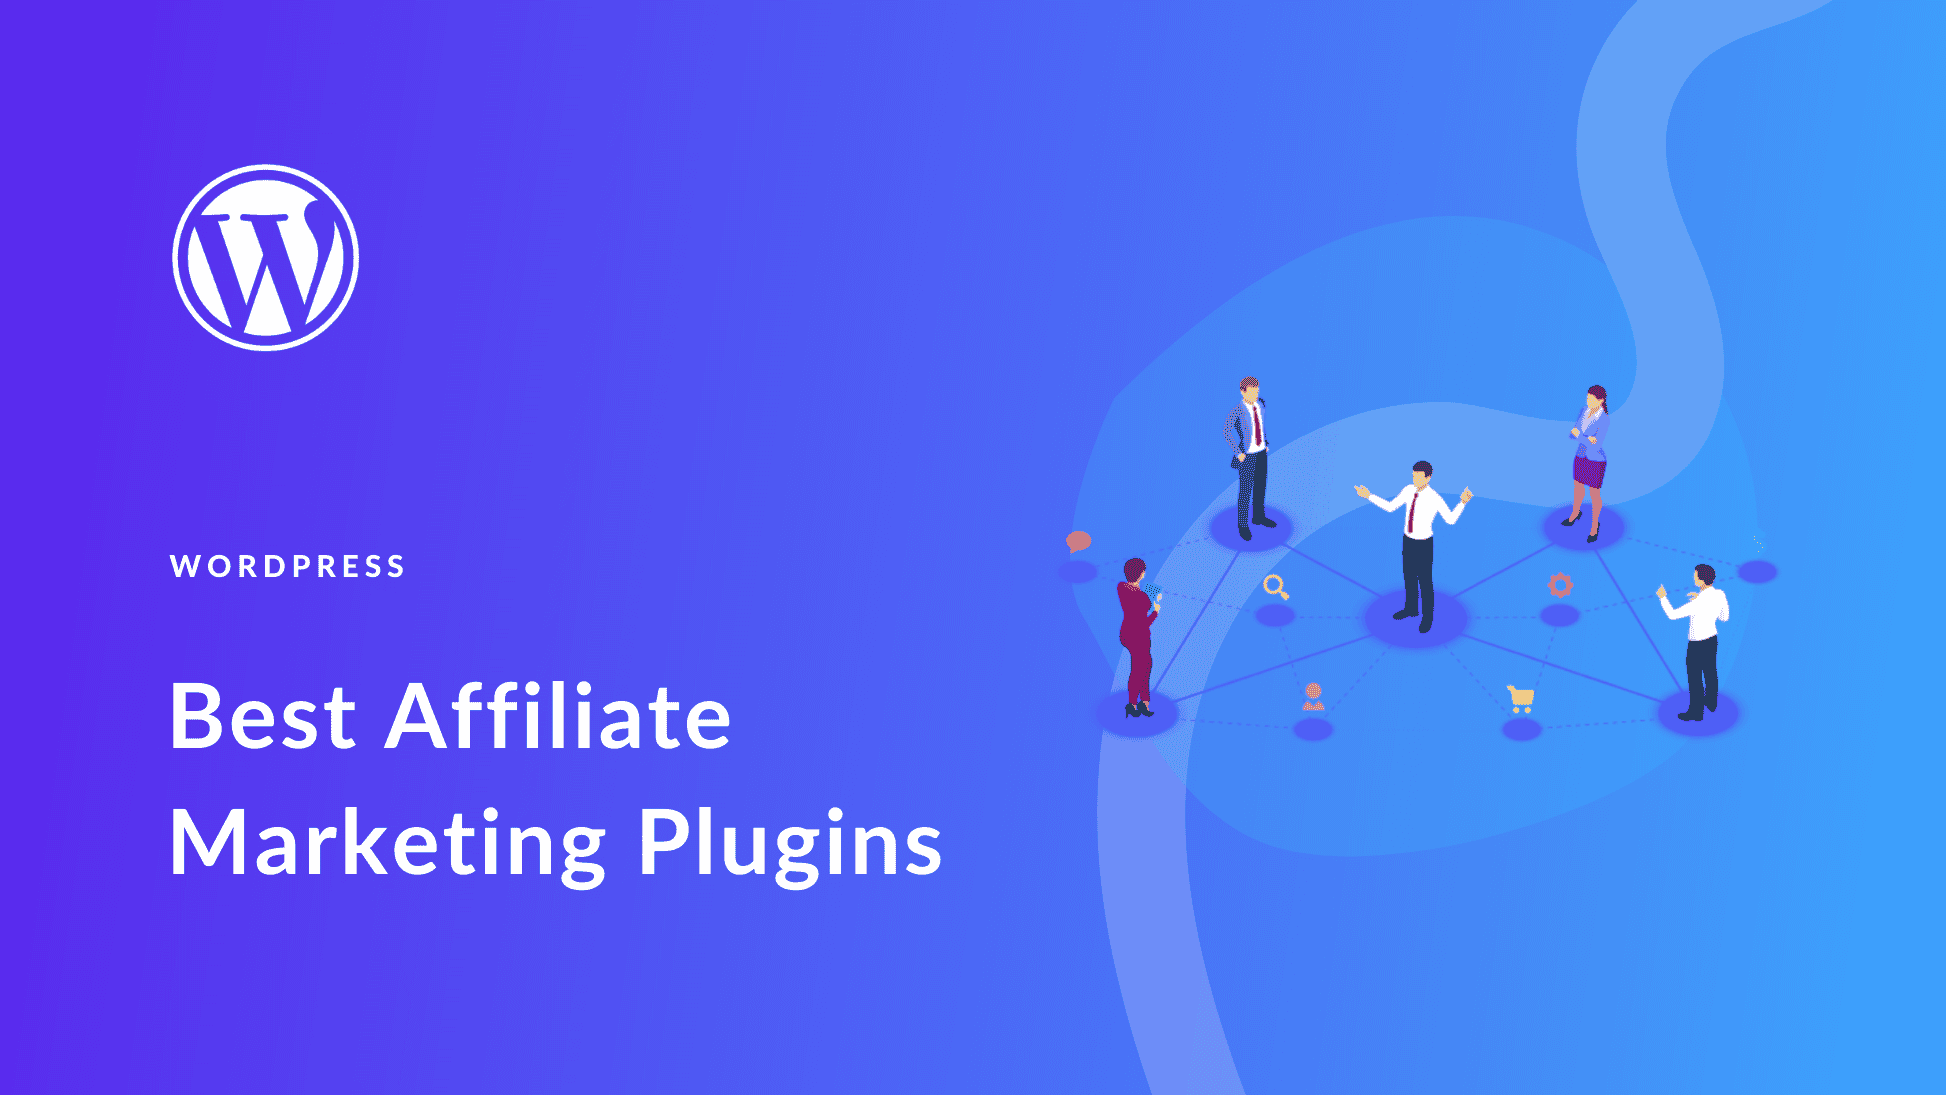 Why You Should Consider WordPress Affiliate Plugins for Your Online Business